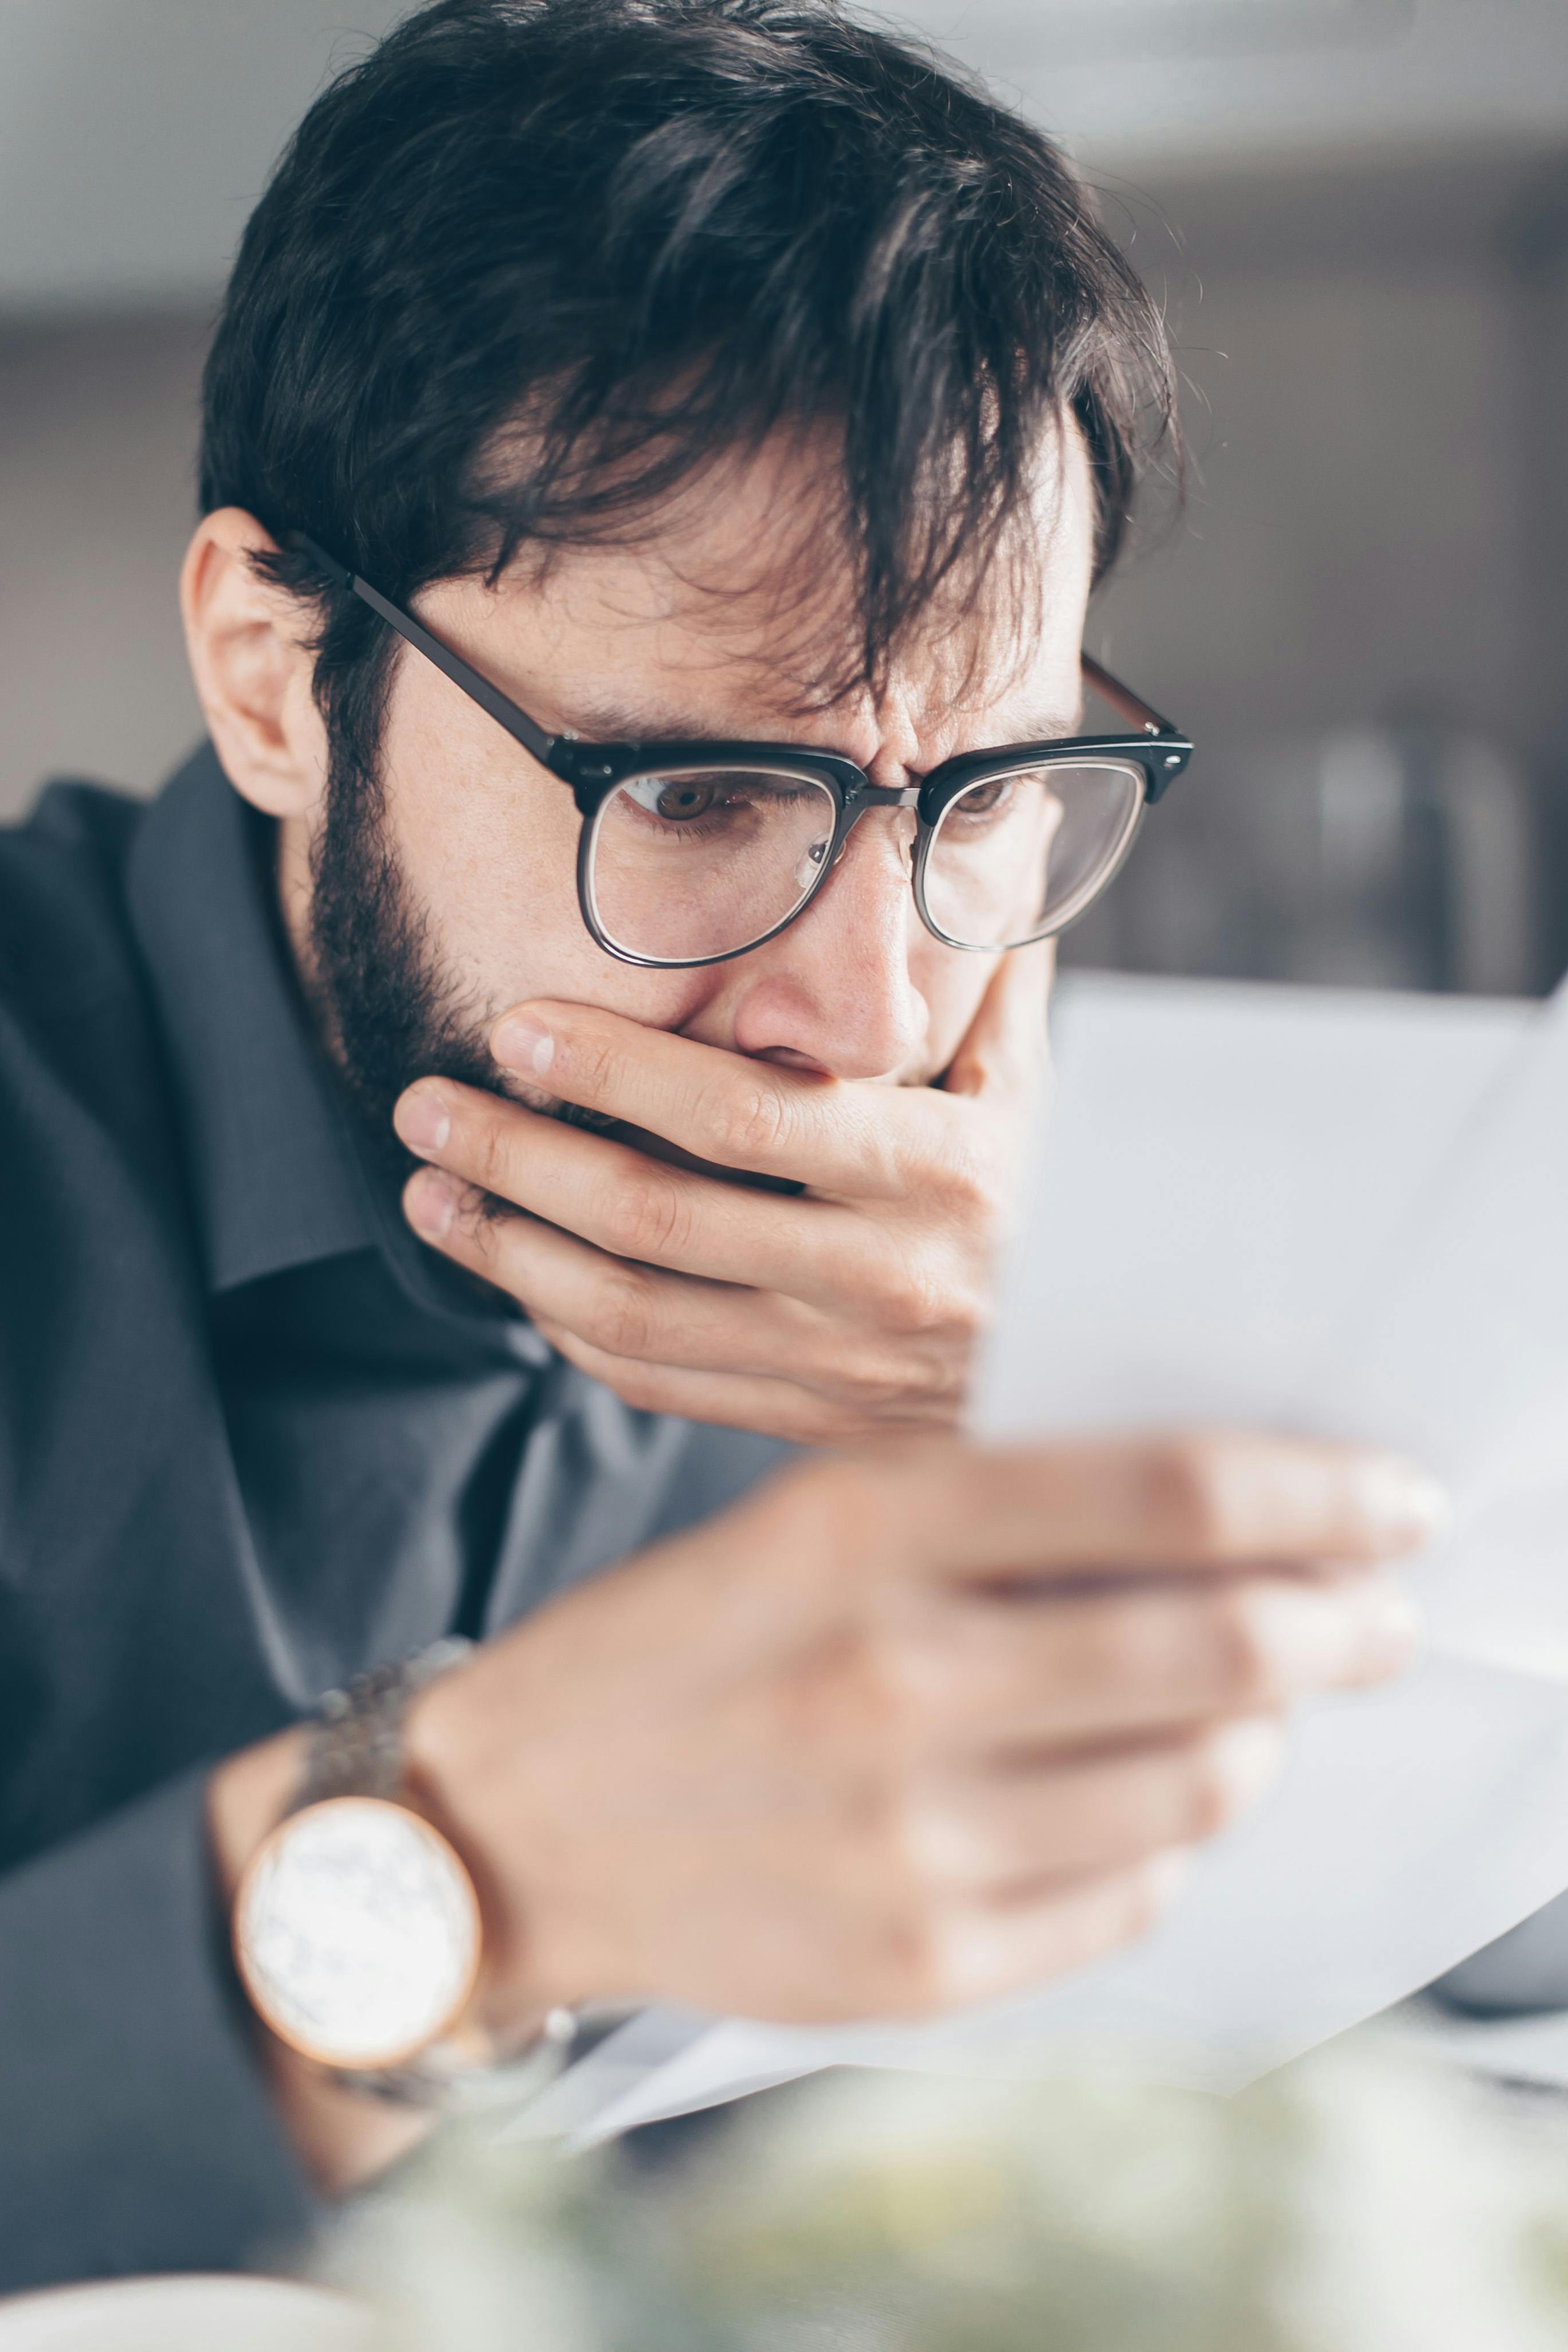 A man looking shocked while reading a note | Source: Pexels